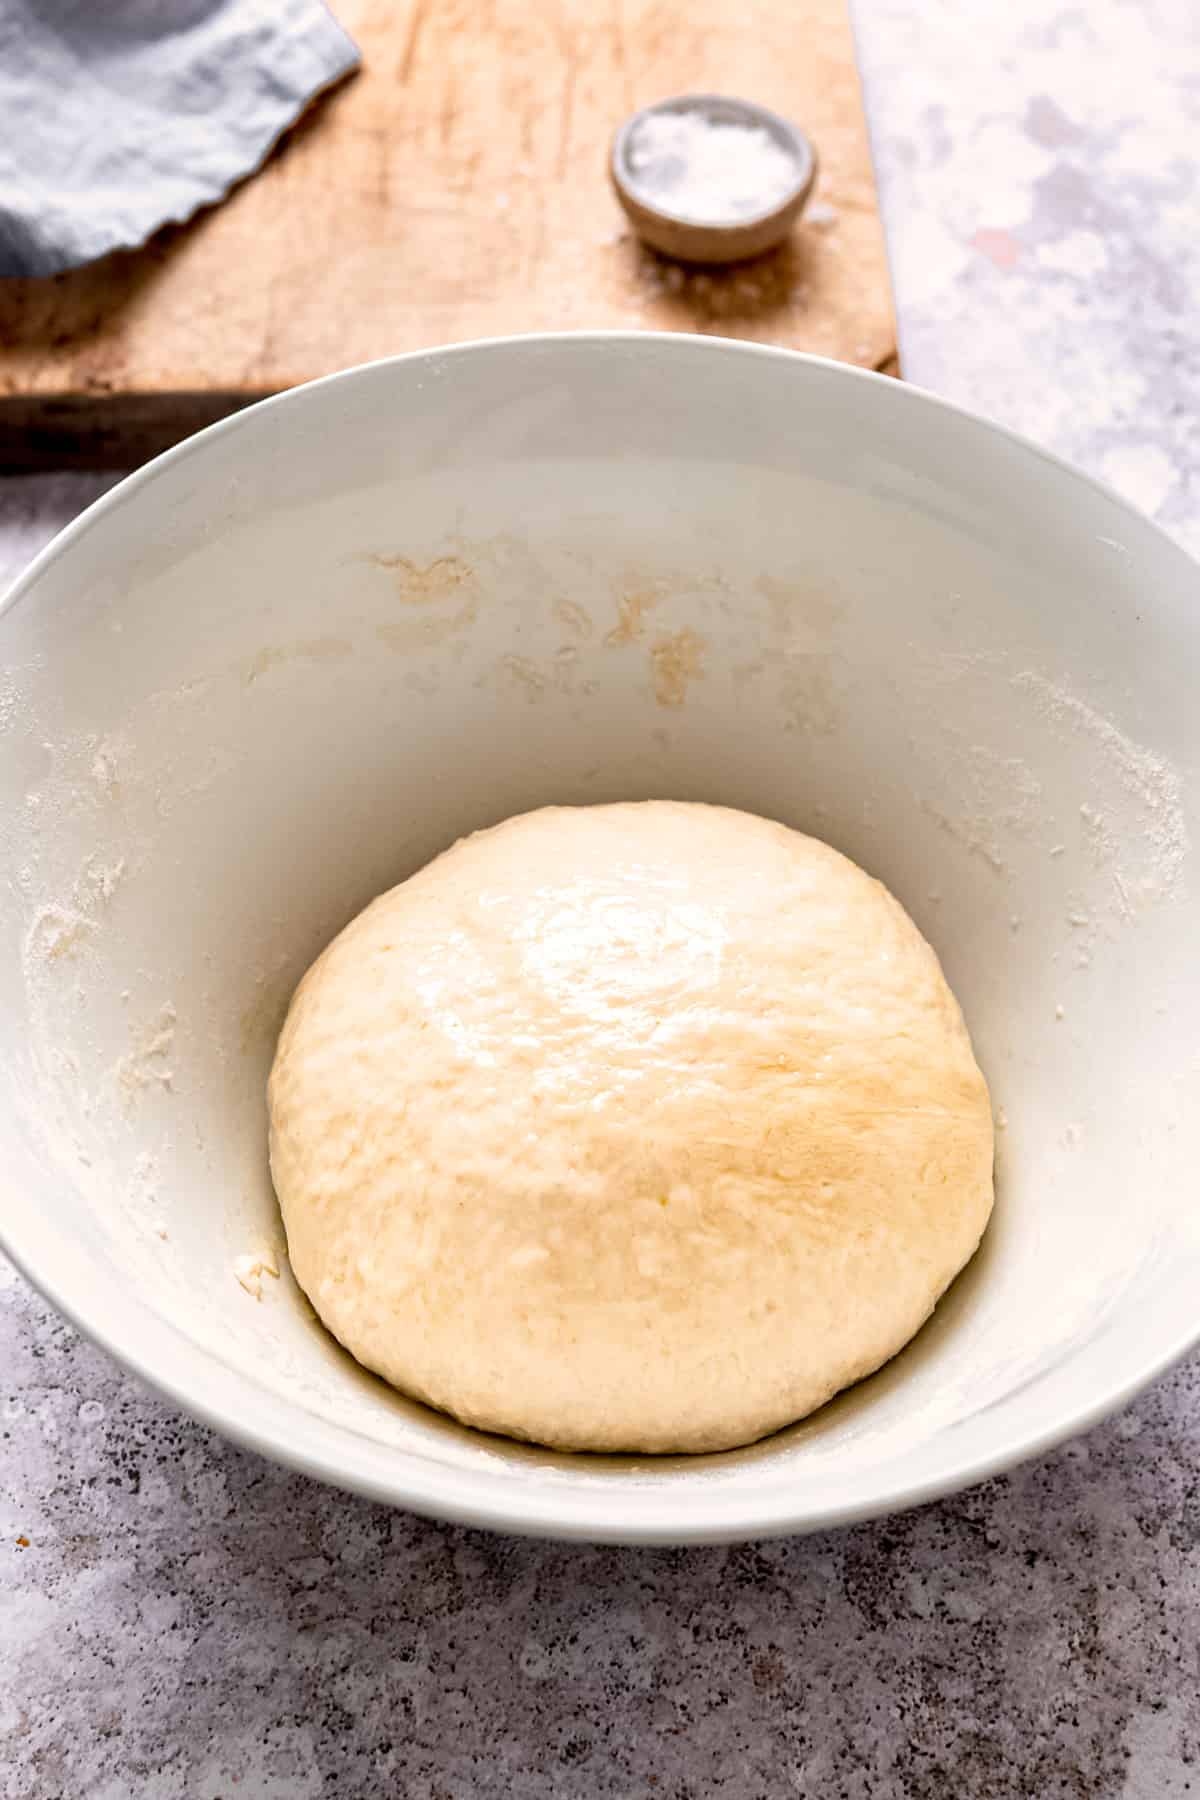 Pizza dough left to rise in a bowl.